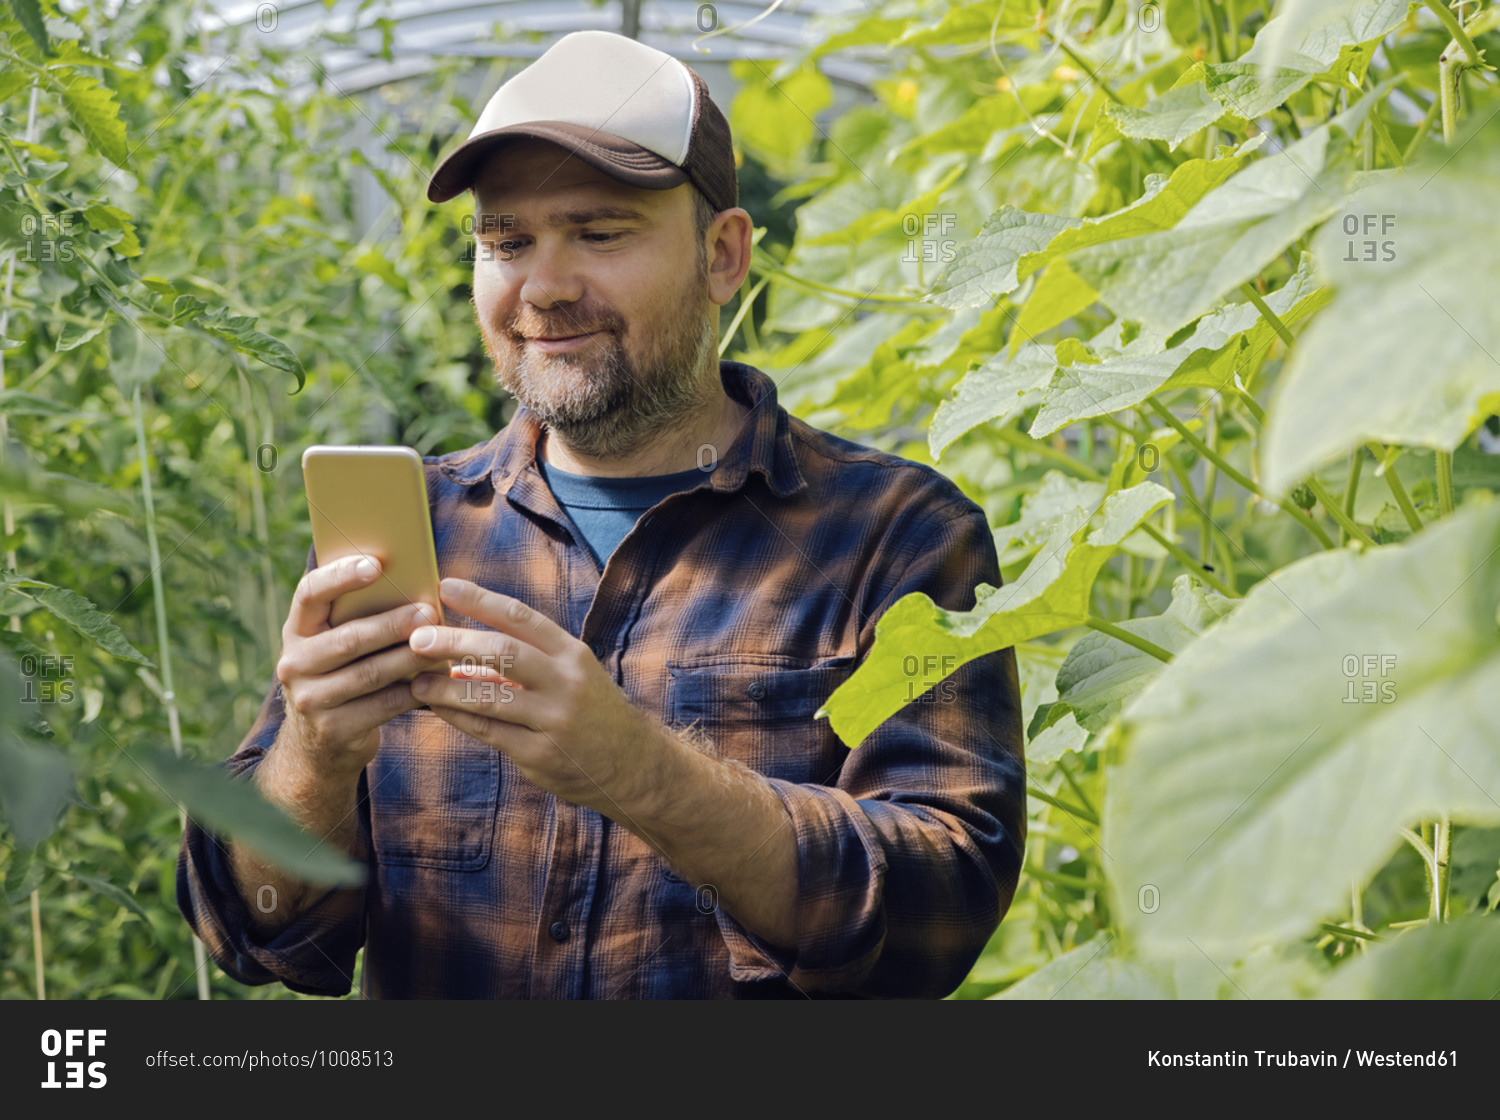 Portrait of a farmer using mobile phone in a greenhouse